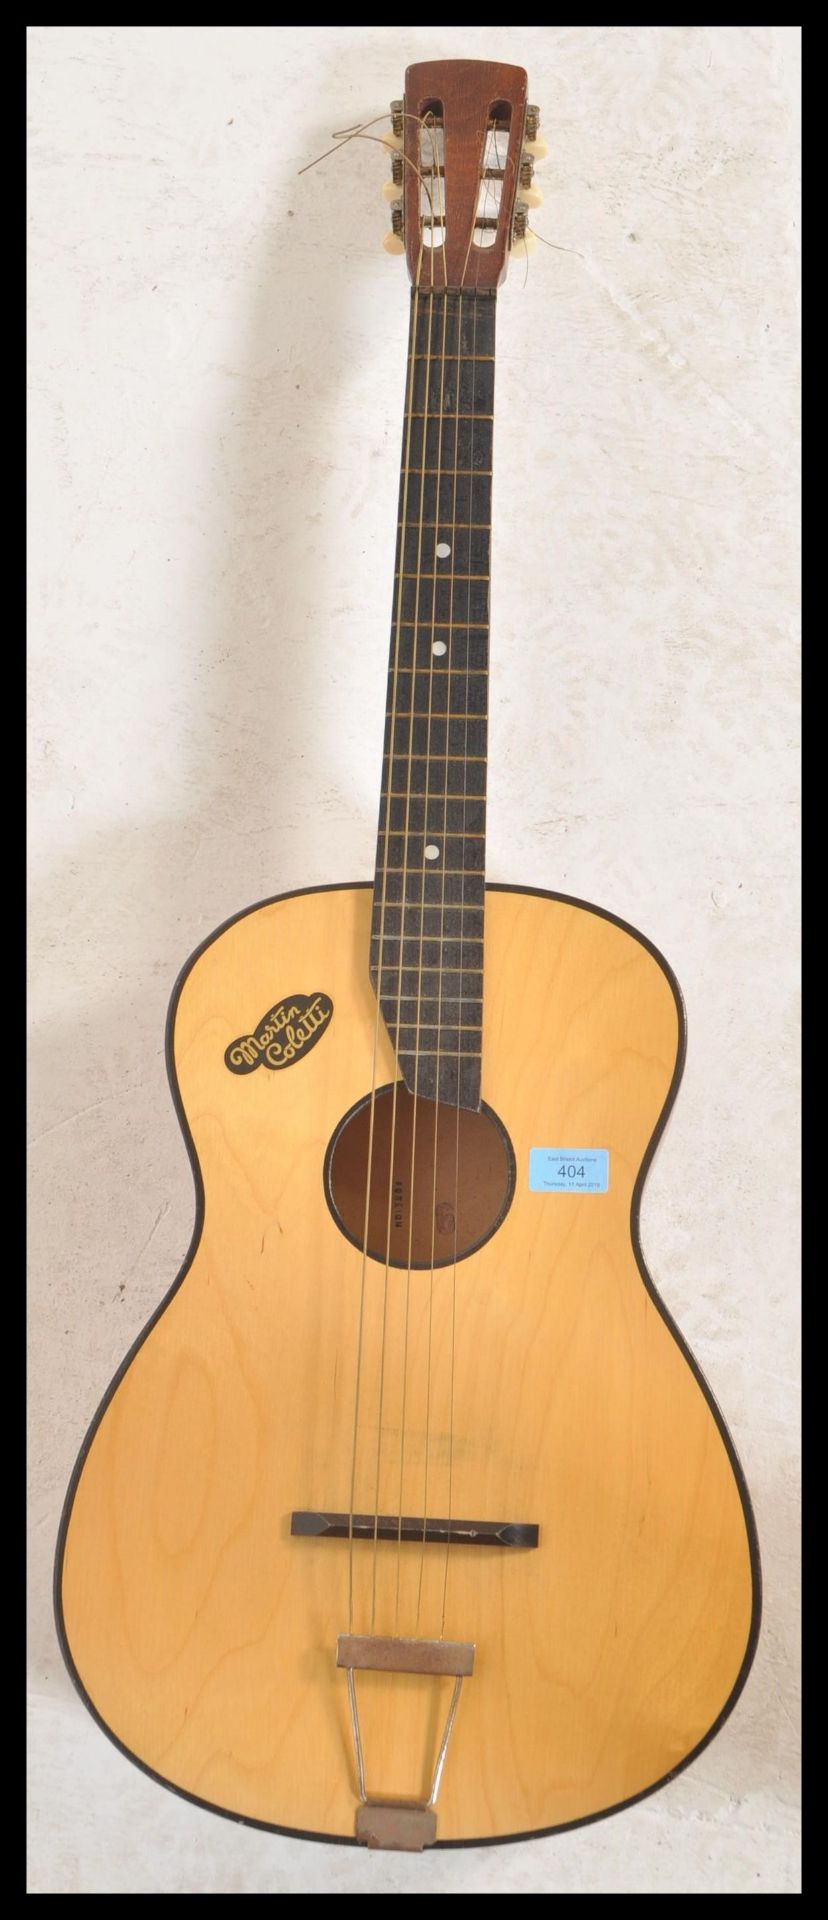 A vintage retro 20th Century Spanish acoustic six string guitar by Martin Callerti having a shaped